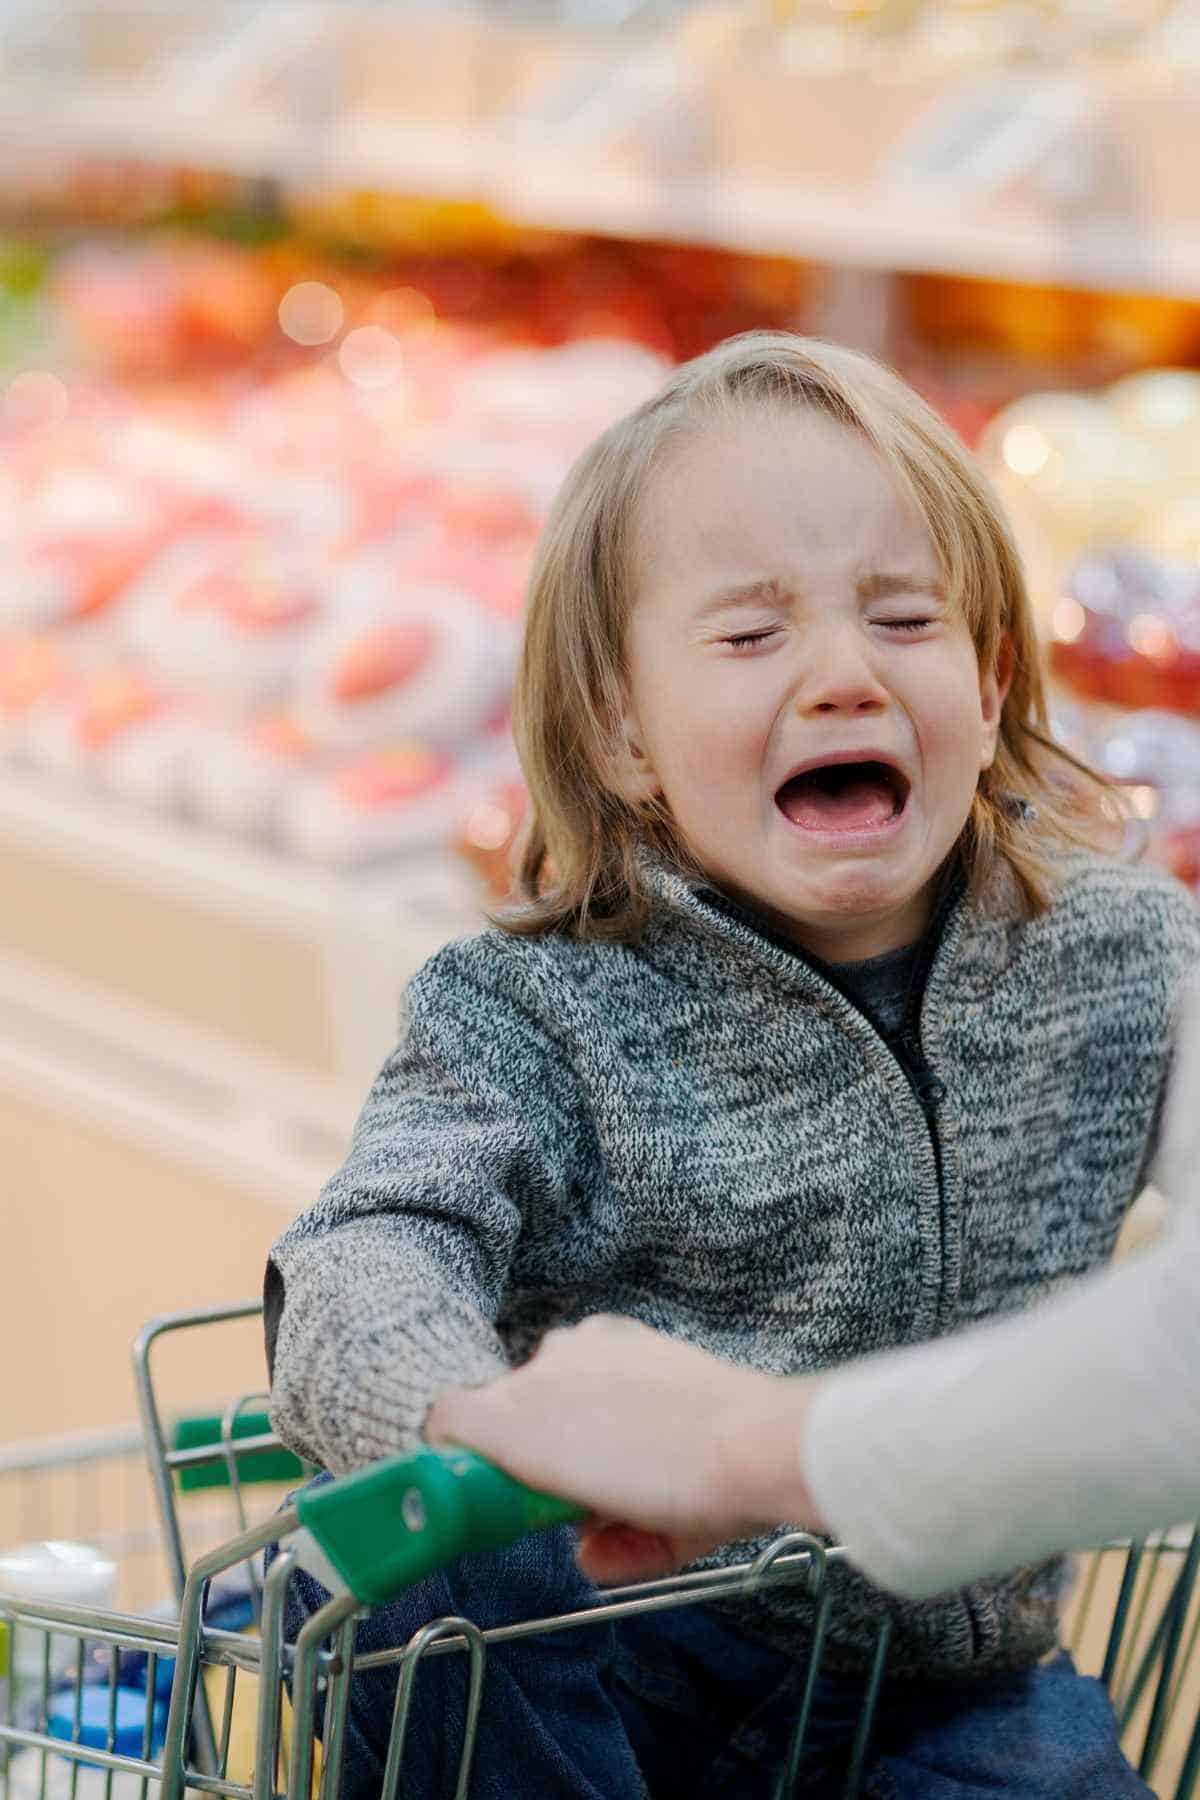 A child crying in a shopping cart in a grocery store when running errands.